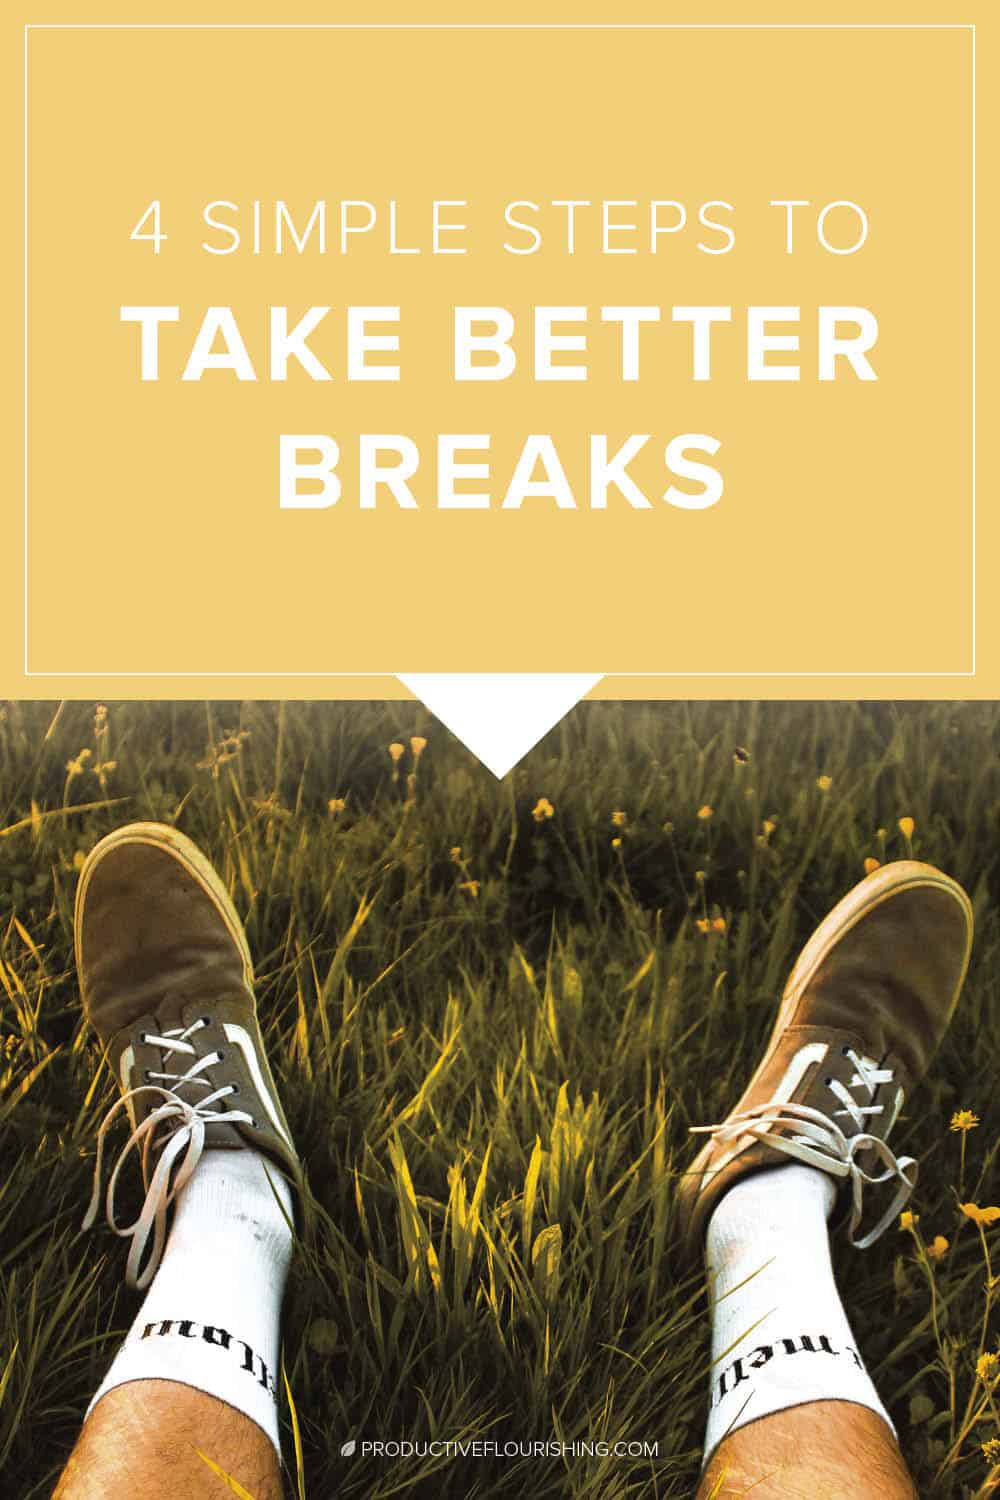 Many of us get caught in a productivity paradox. We wish for that proverbial extra hour in a day that allegedly would let us accomplish everything on our to-do list. But, if we do actually take time off for ourselves, we don’t really know how to break well. Here are four simple steps to take better breaks. #entrepreneurship #smallbusinessoverwhelm #productiveflourishing